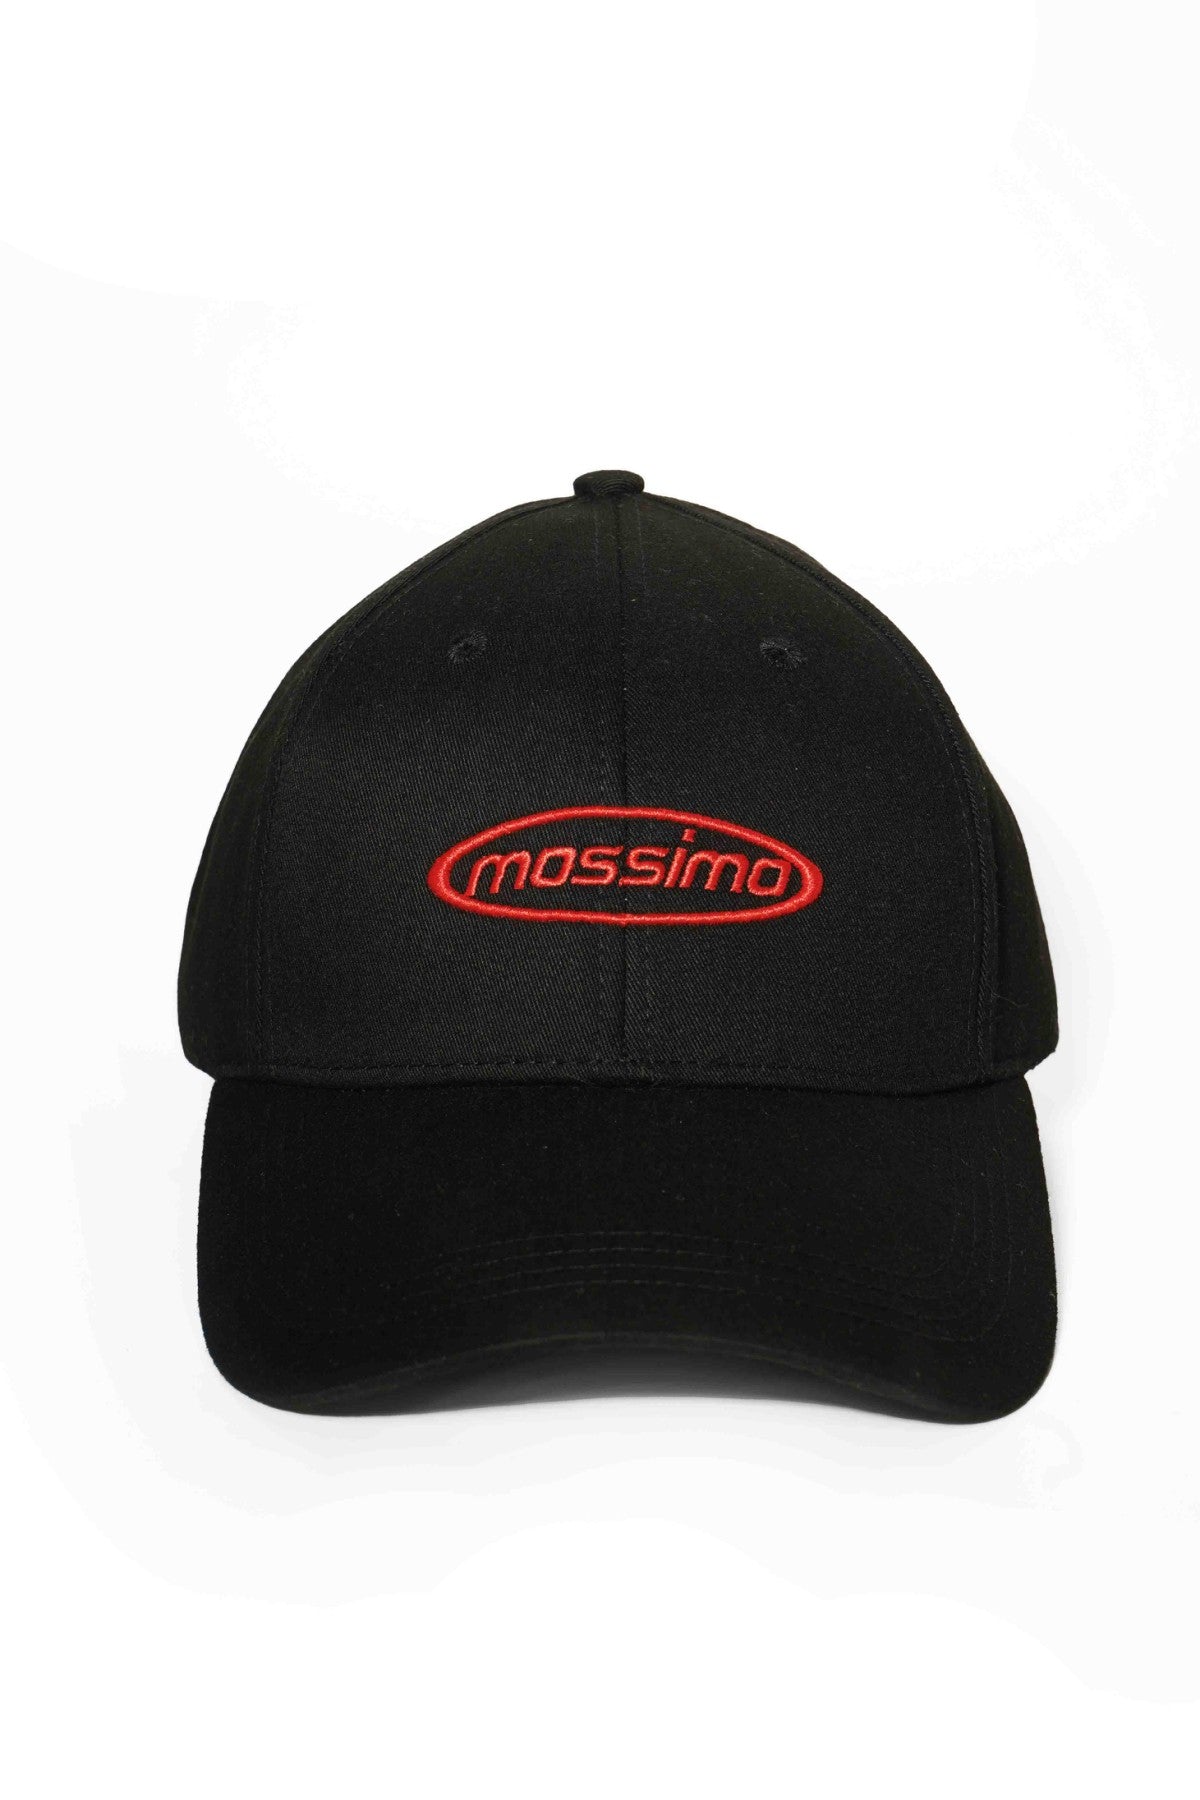 Mossimo Black Baseball Cap with Direct Embroidery - Mossimo PH